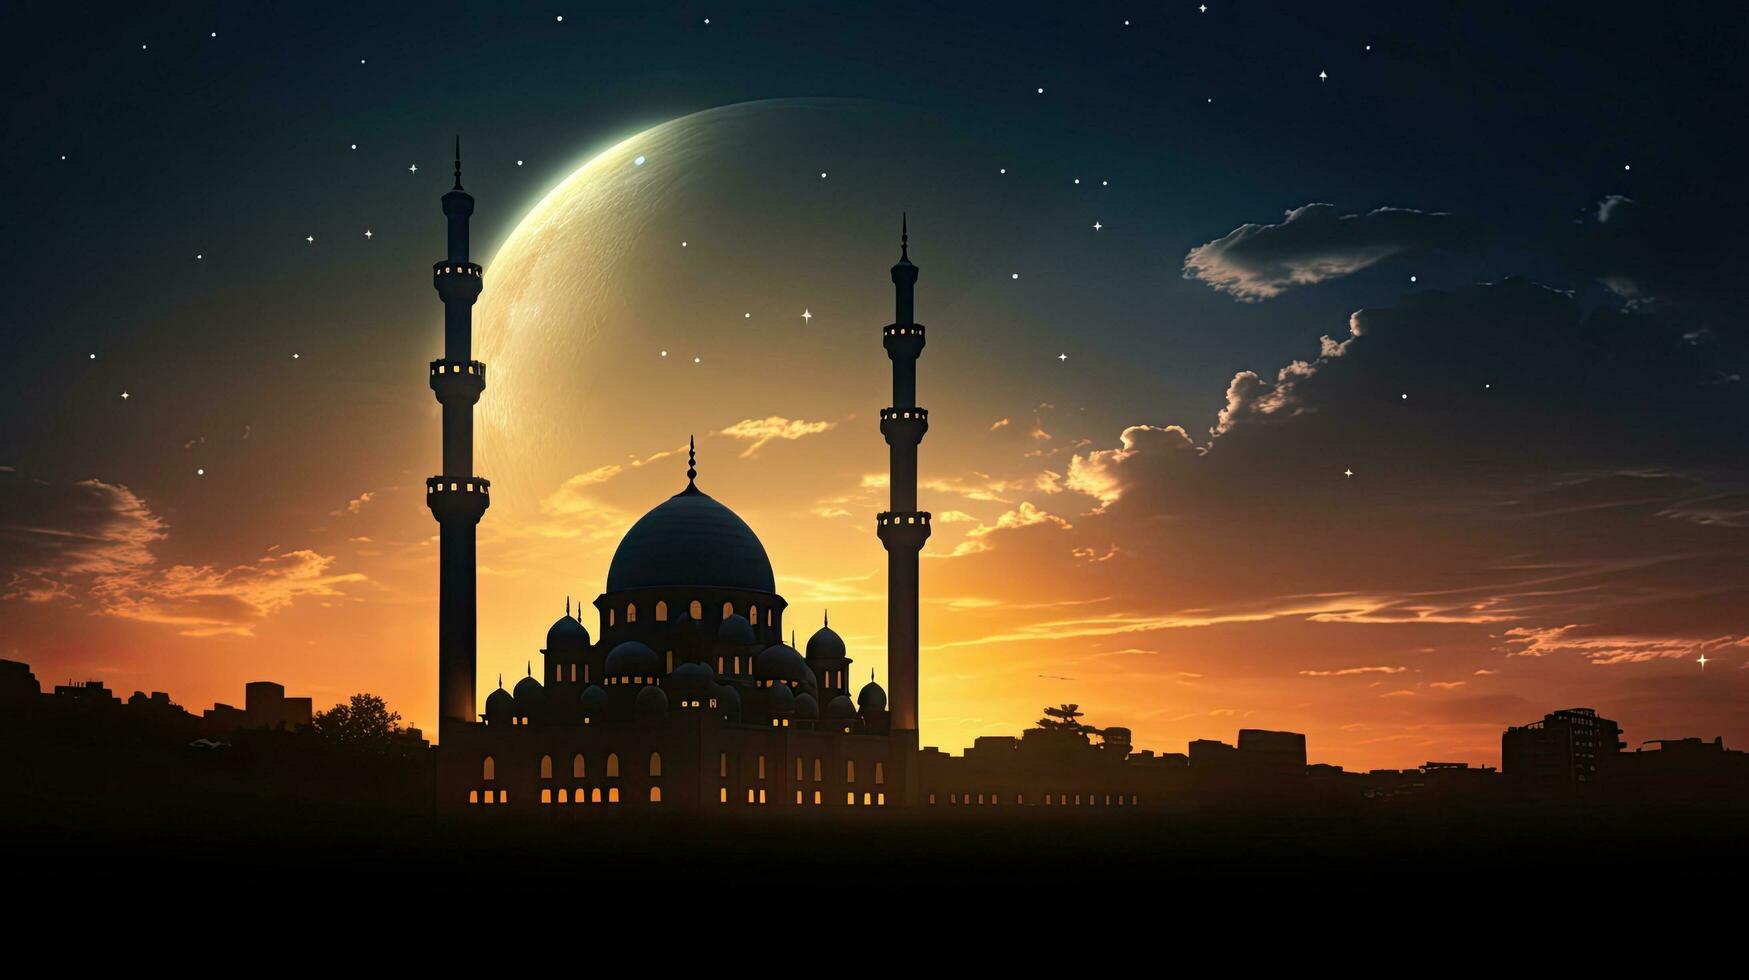 Islamic mosque at sunset with a beautiful moon in the sky creating a holy and serene night photo